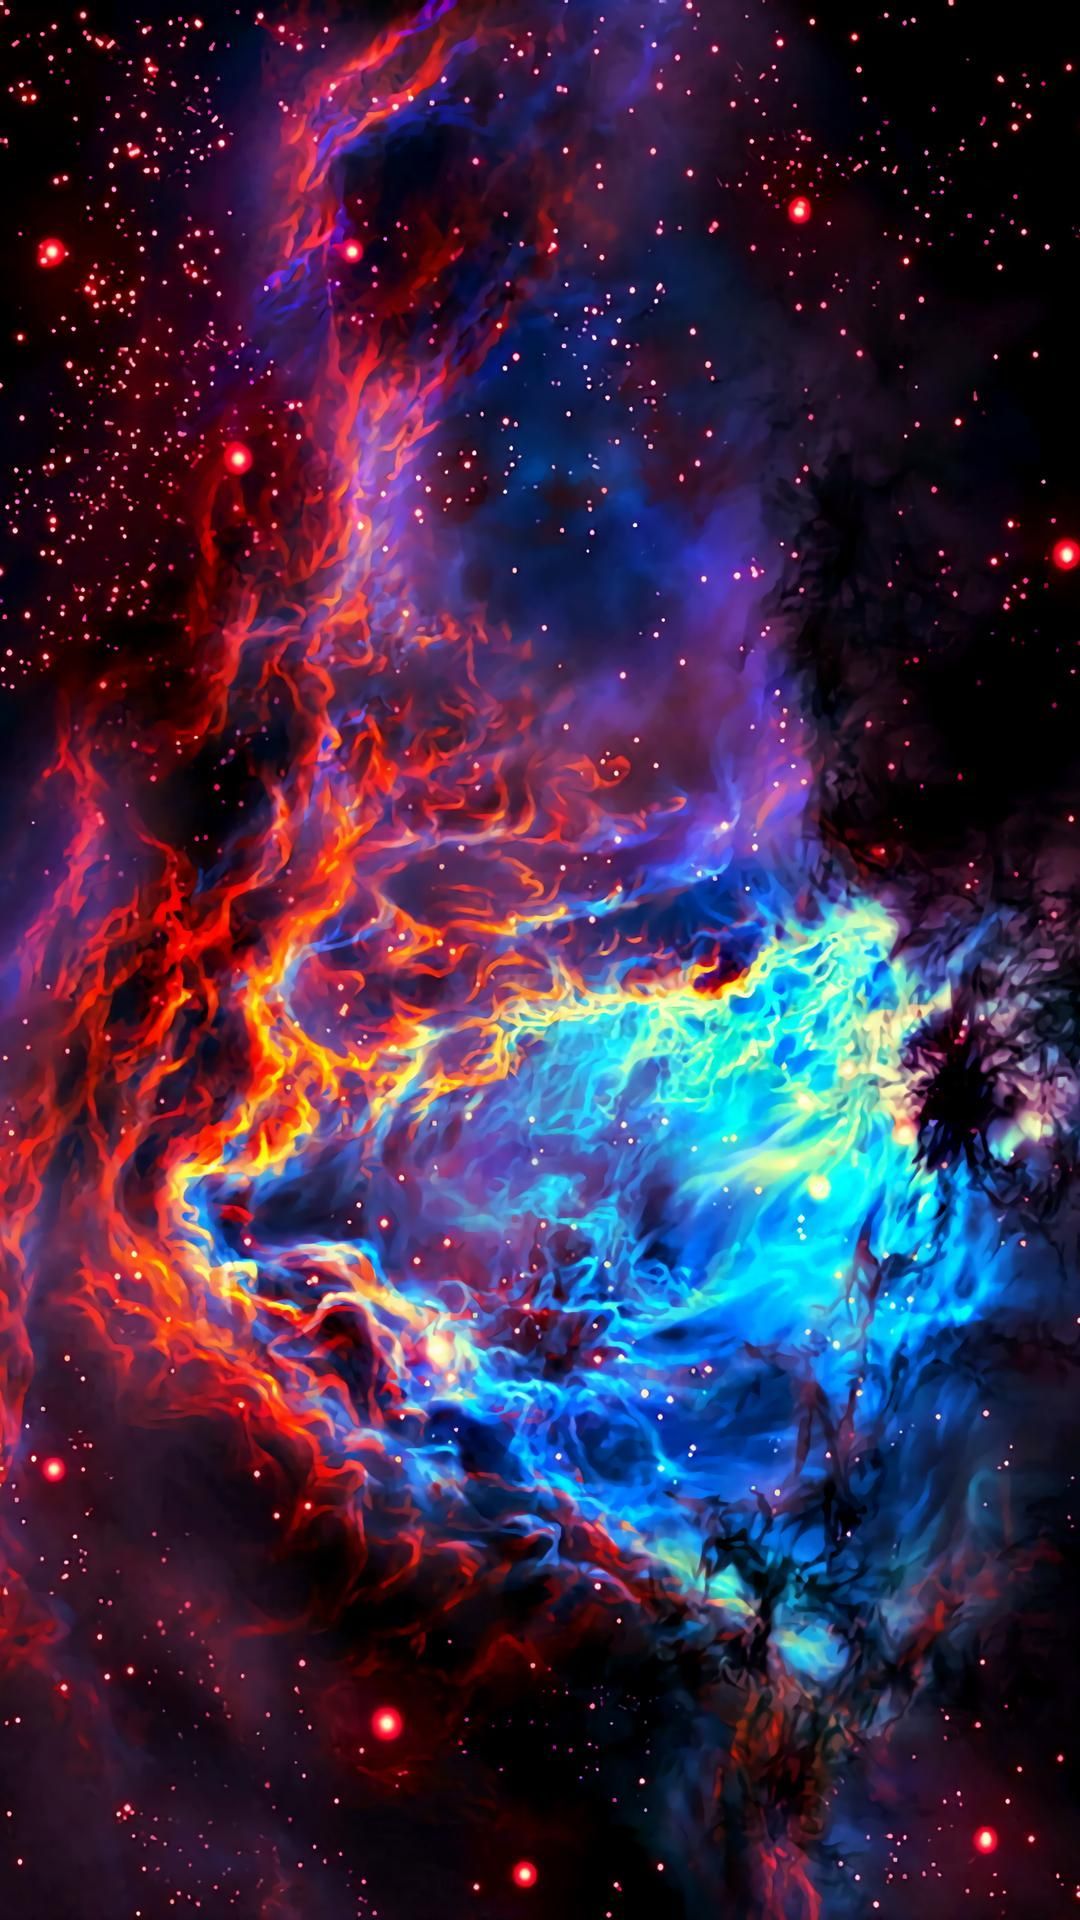 Cosmic Birth. Space picture, Space and astronomy, Outer space